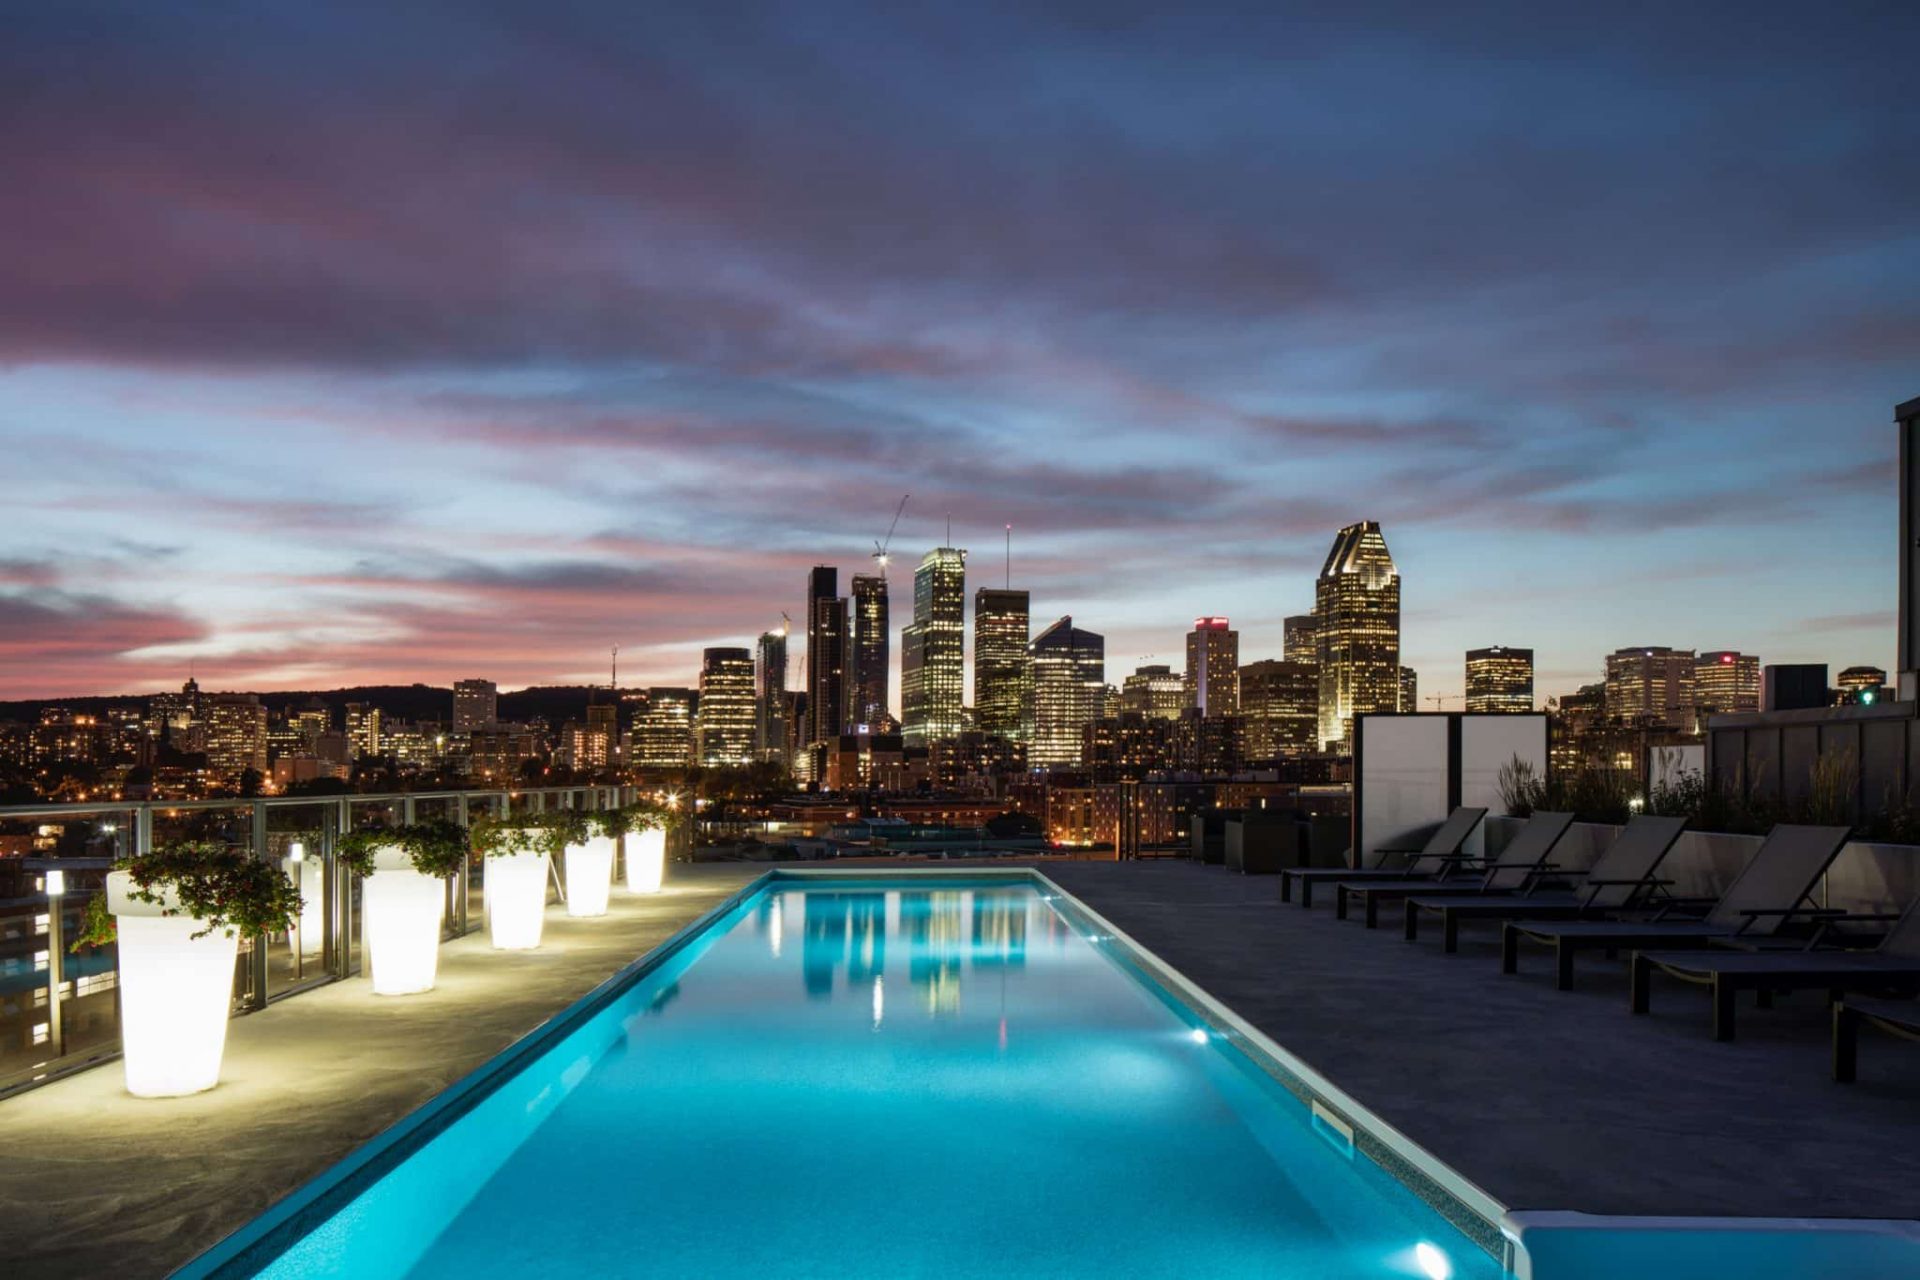 4-bassins-du-havre-waterfront-community-montreal-lemay-architecture-design-pool-city-nightview